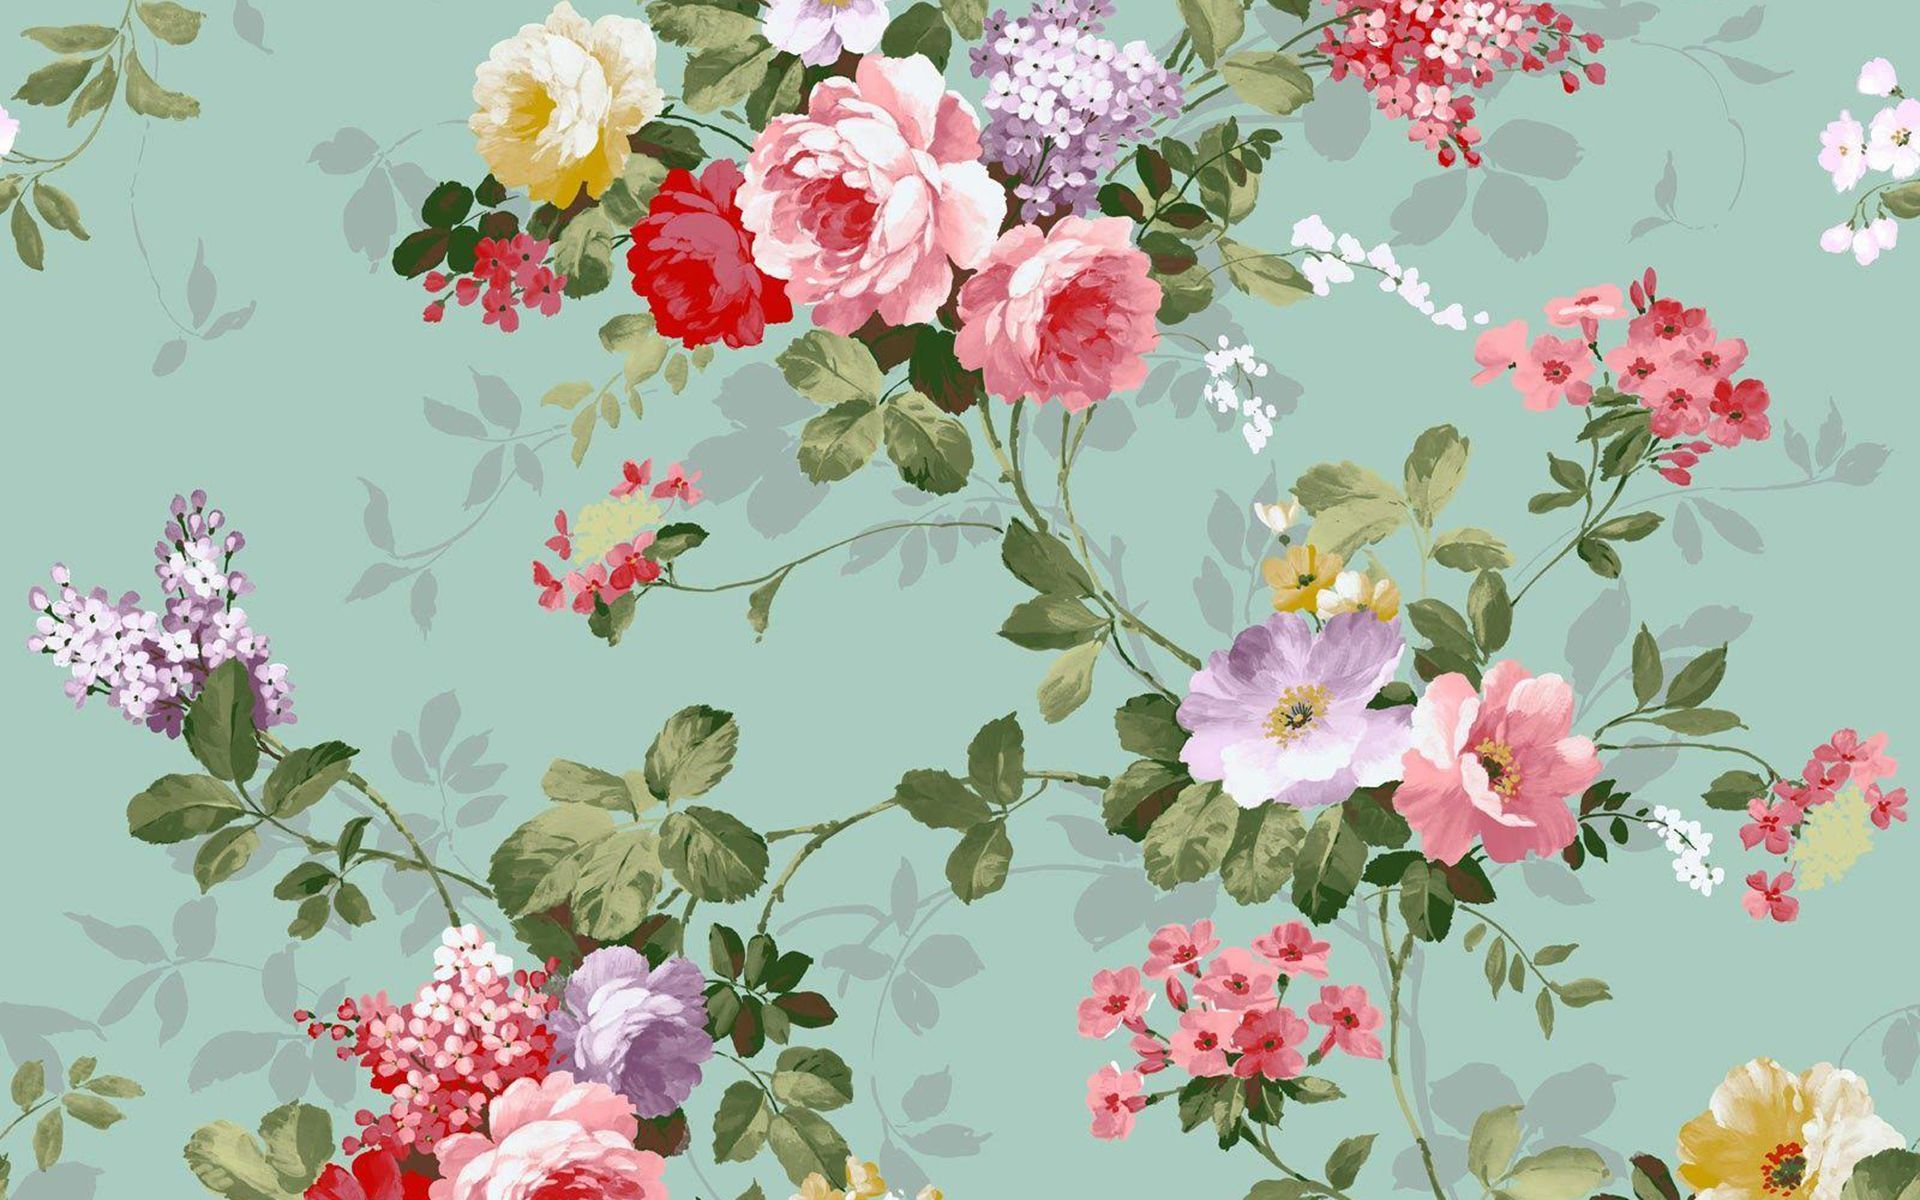 A vintage floral wallpaper design with pink, red, purple, and white flowers on a green background. - Coquette